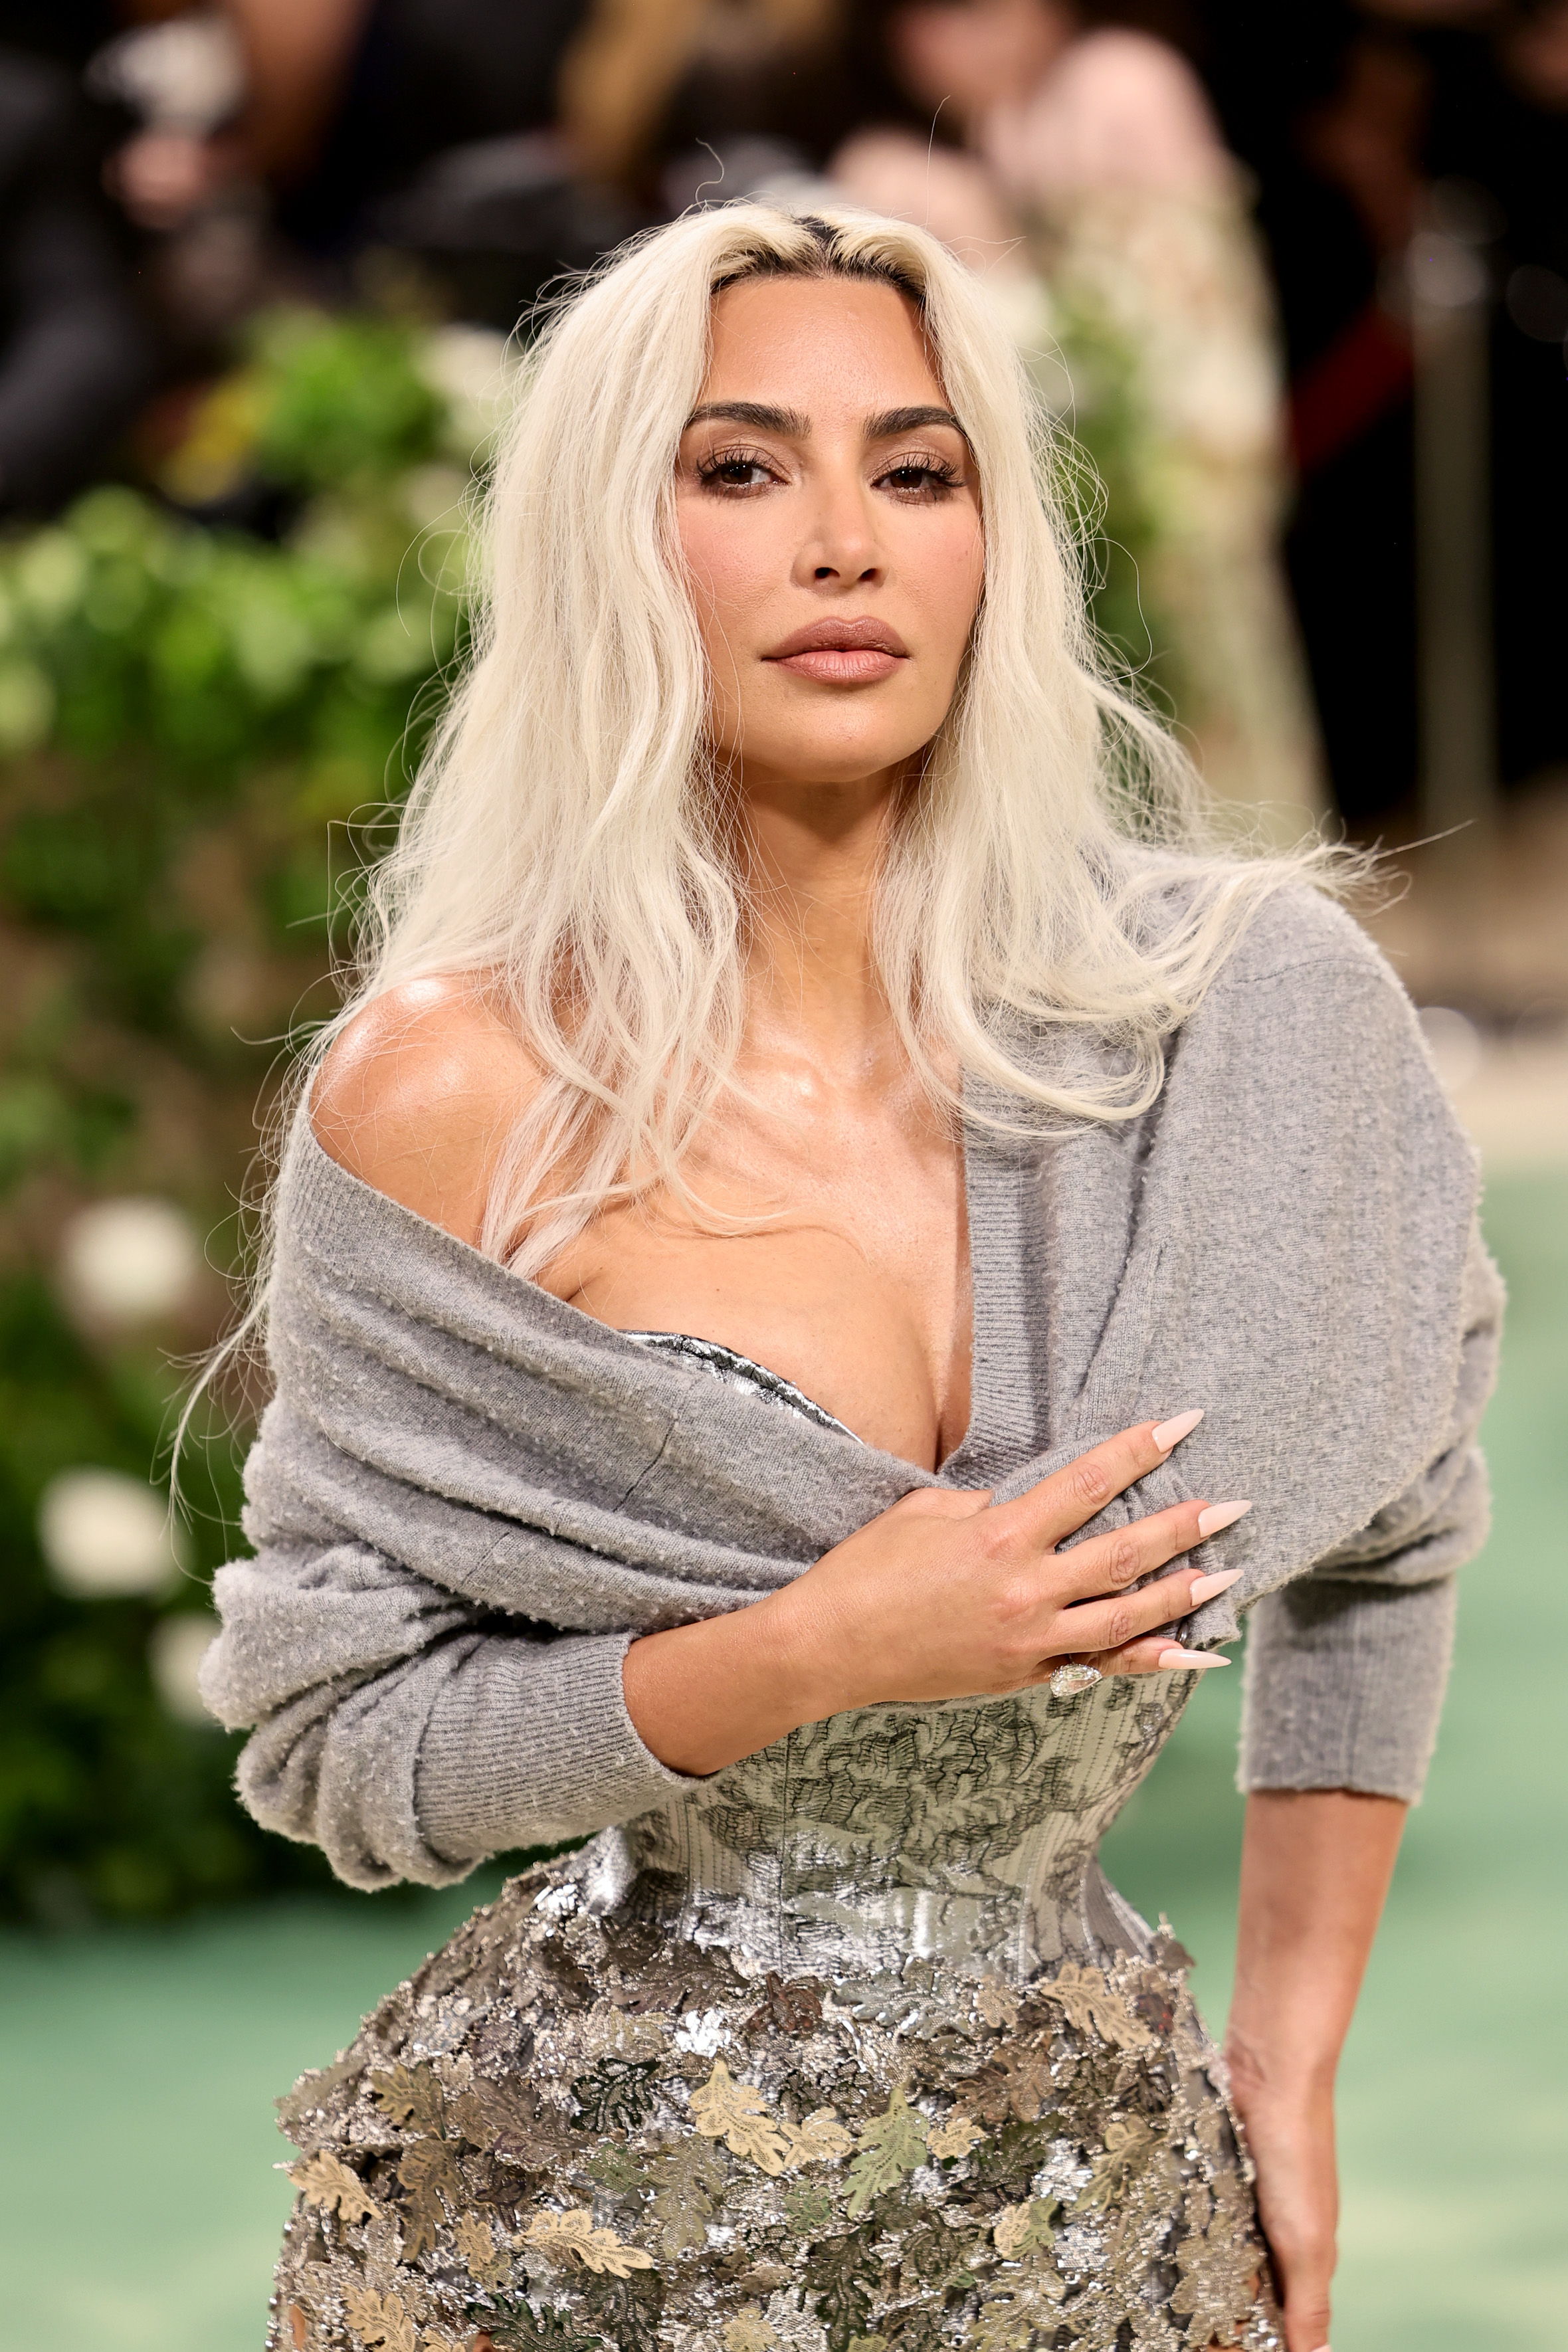 Kim Kardashian in an off-the-shoulder sweater with a metallic, floral-patterned skirt, poses on the red carpet